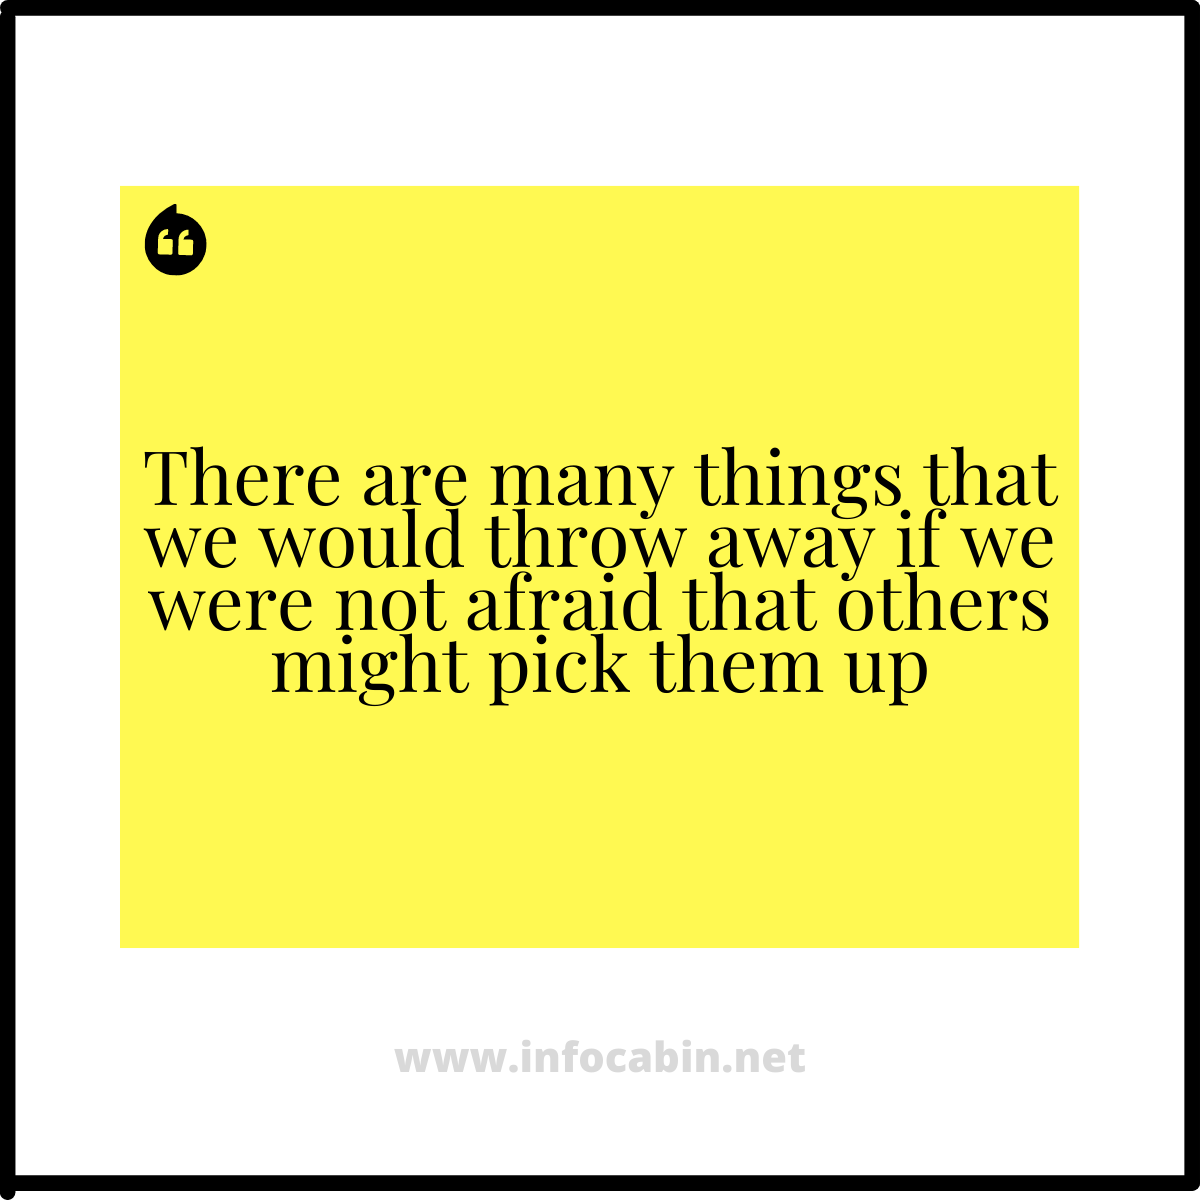 There are many things that we would throw away if we were not afraid that others might pick them up